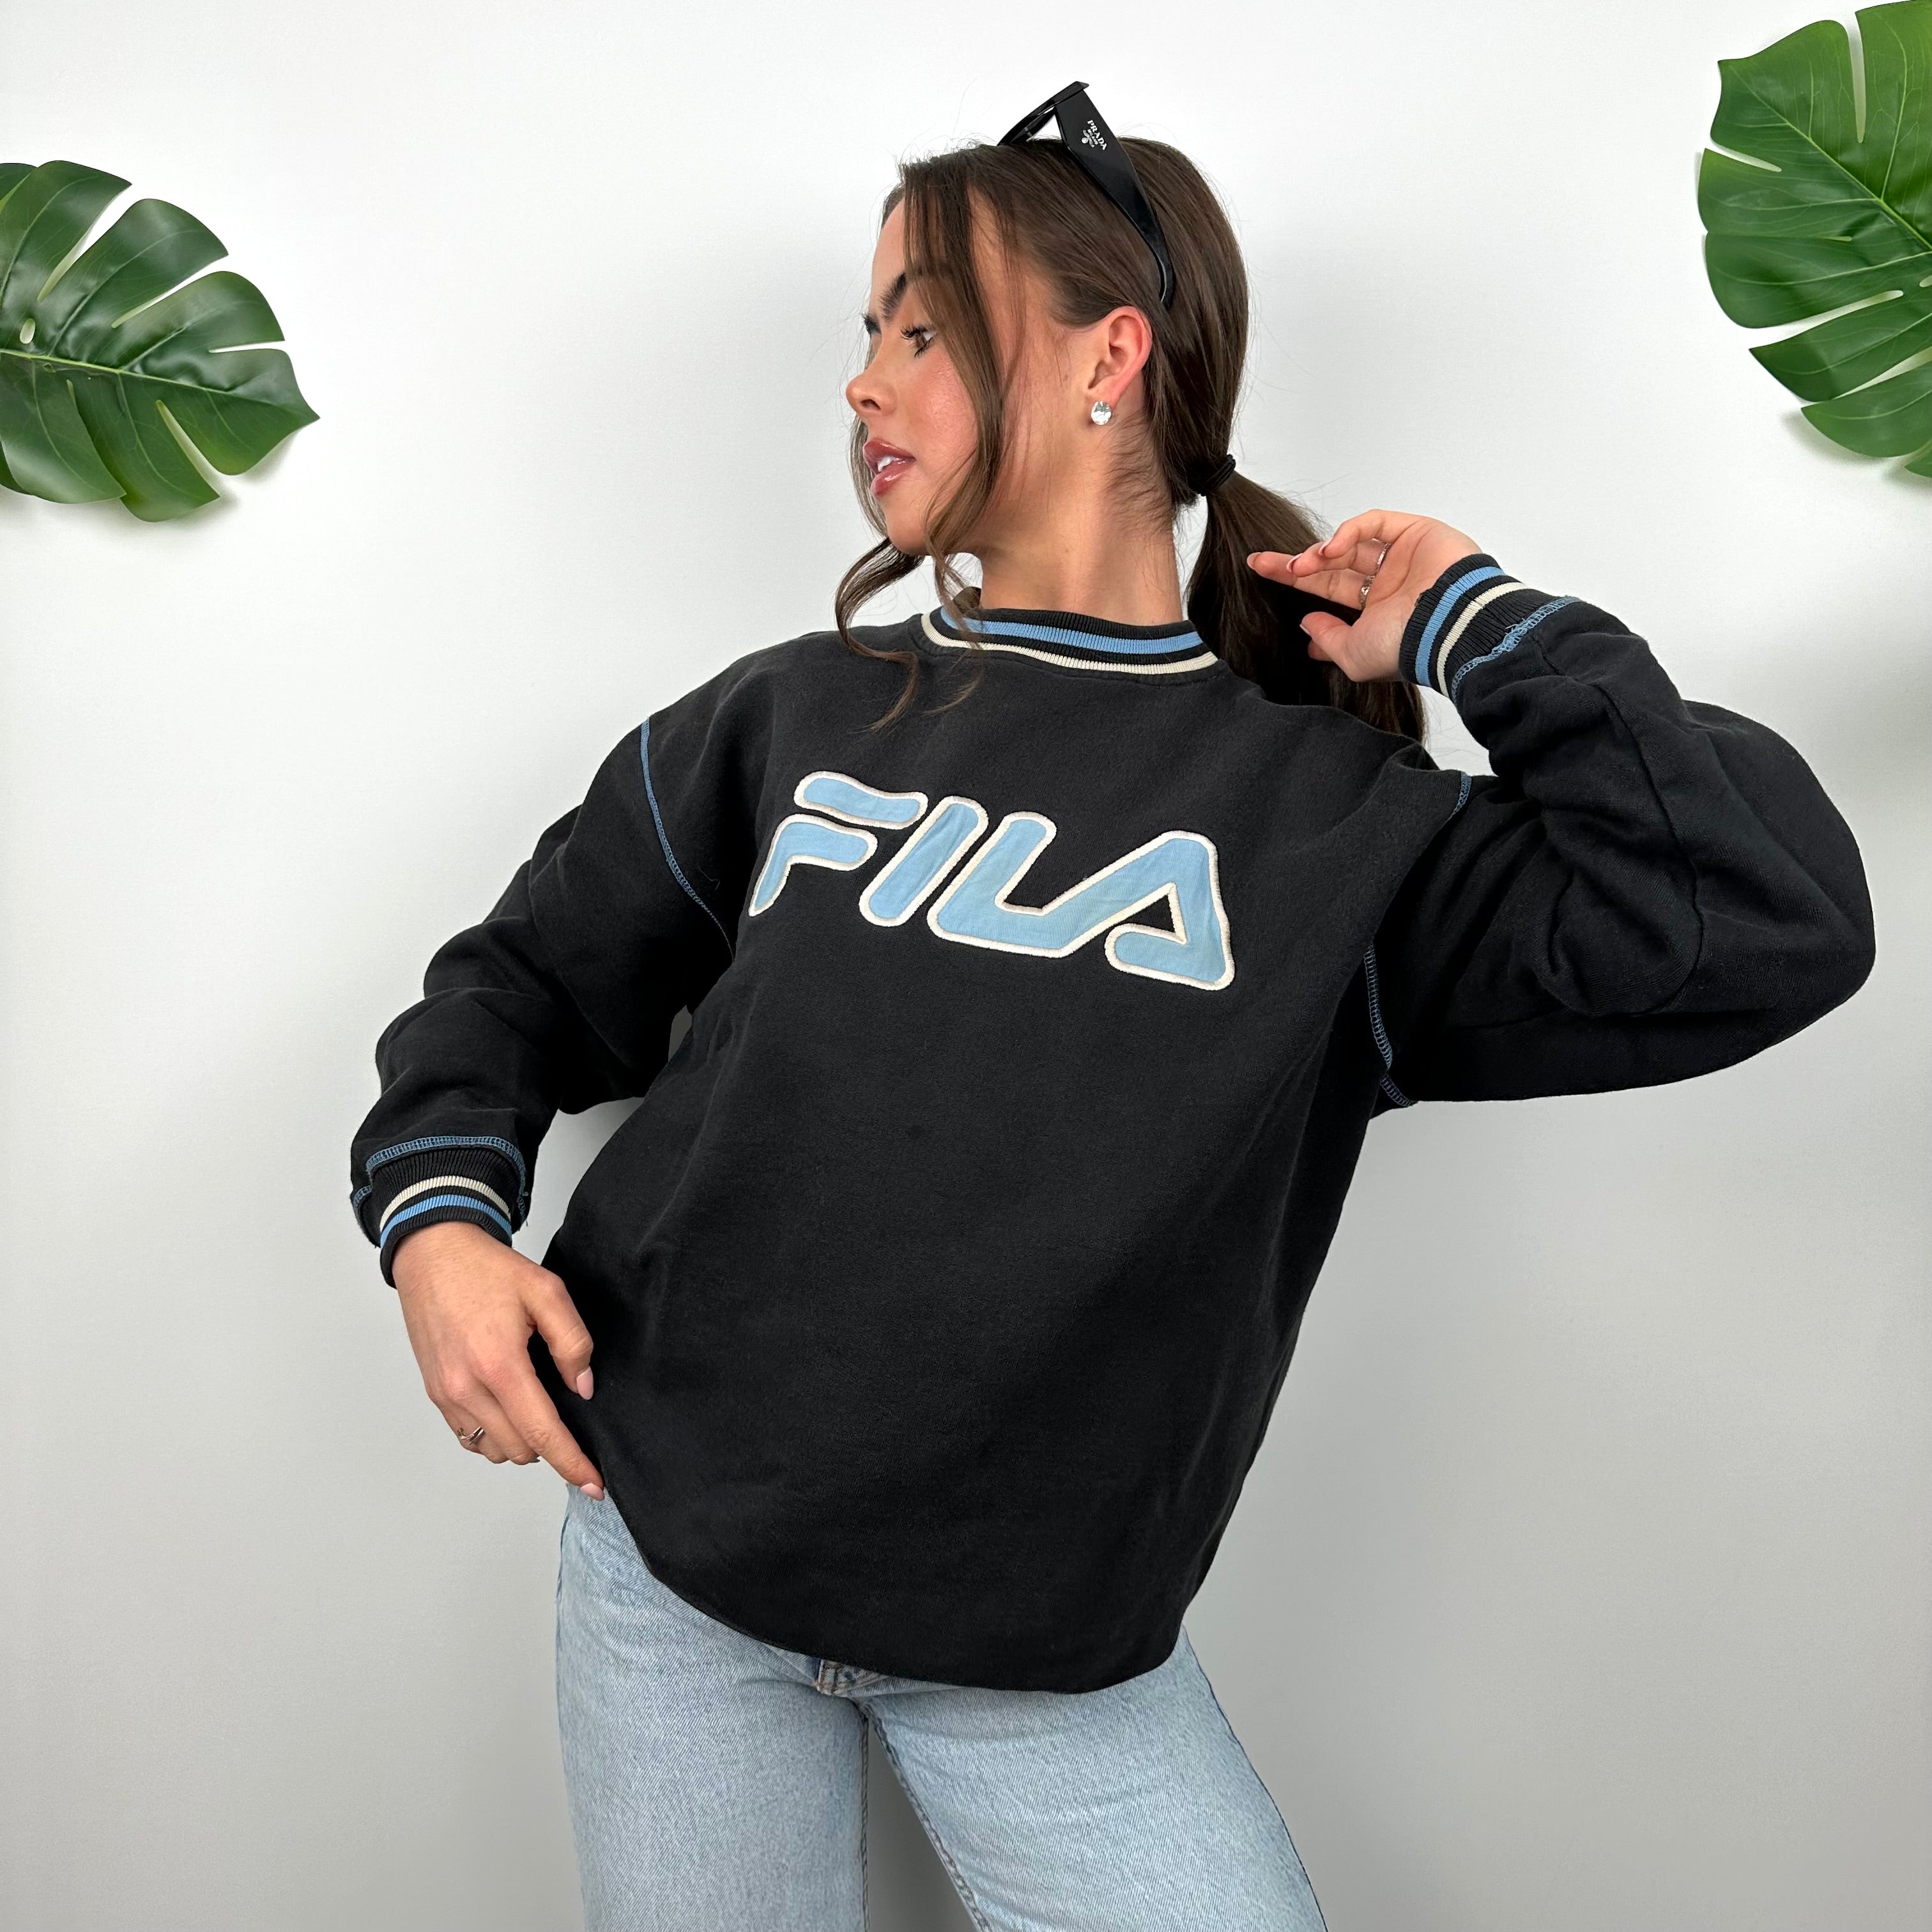 FILA Black Embroidered Spell Out Sweatshirt (M)